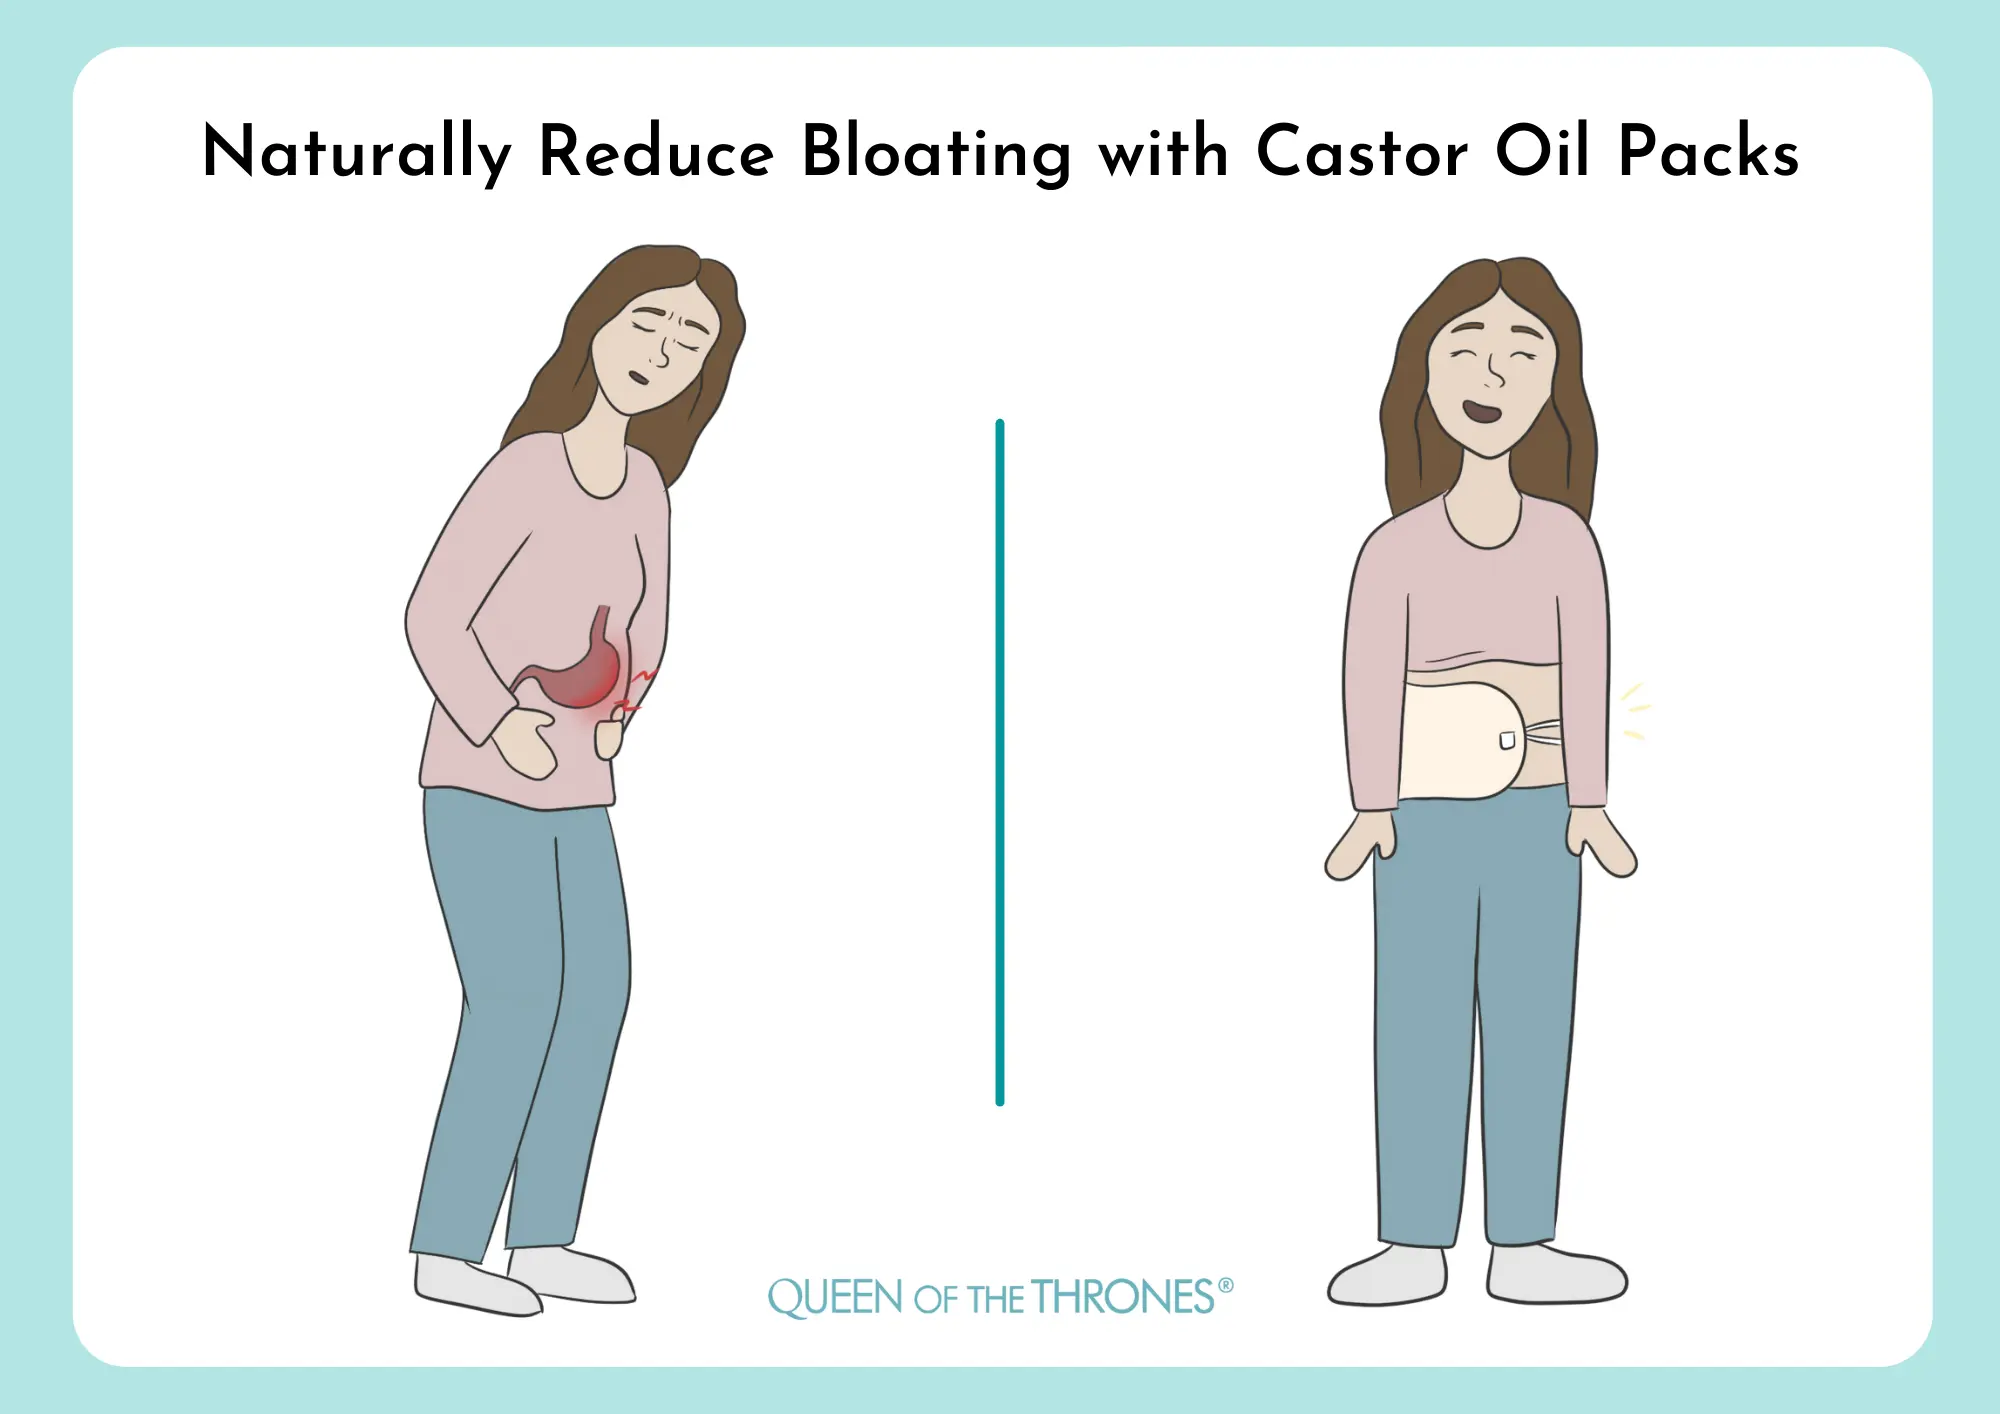 Naturally reduce bloating with Queen of the Thrones Castor Oil Packs